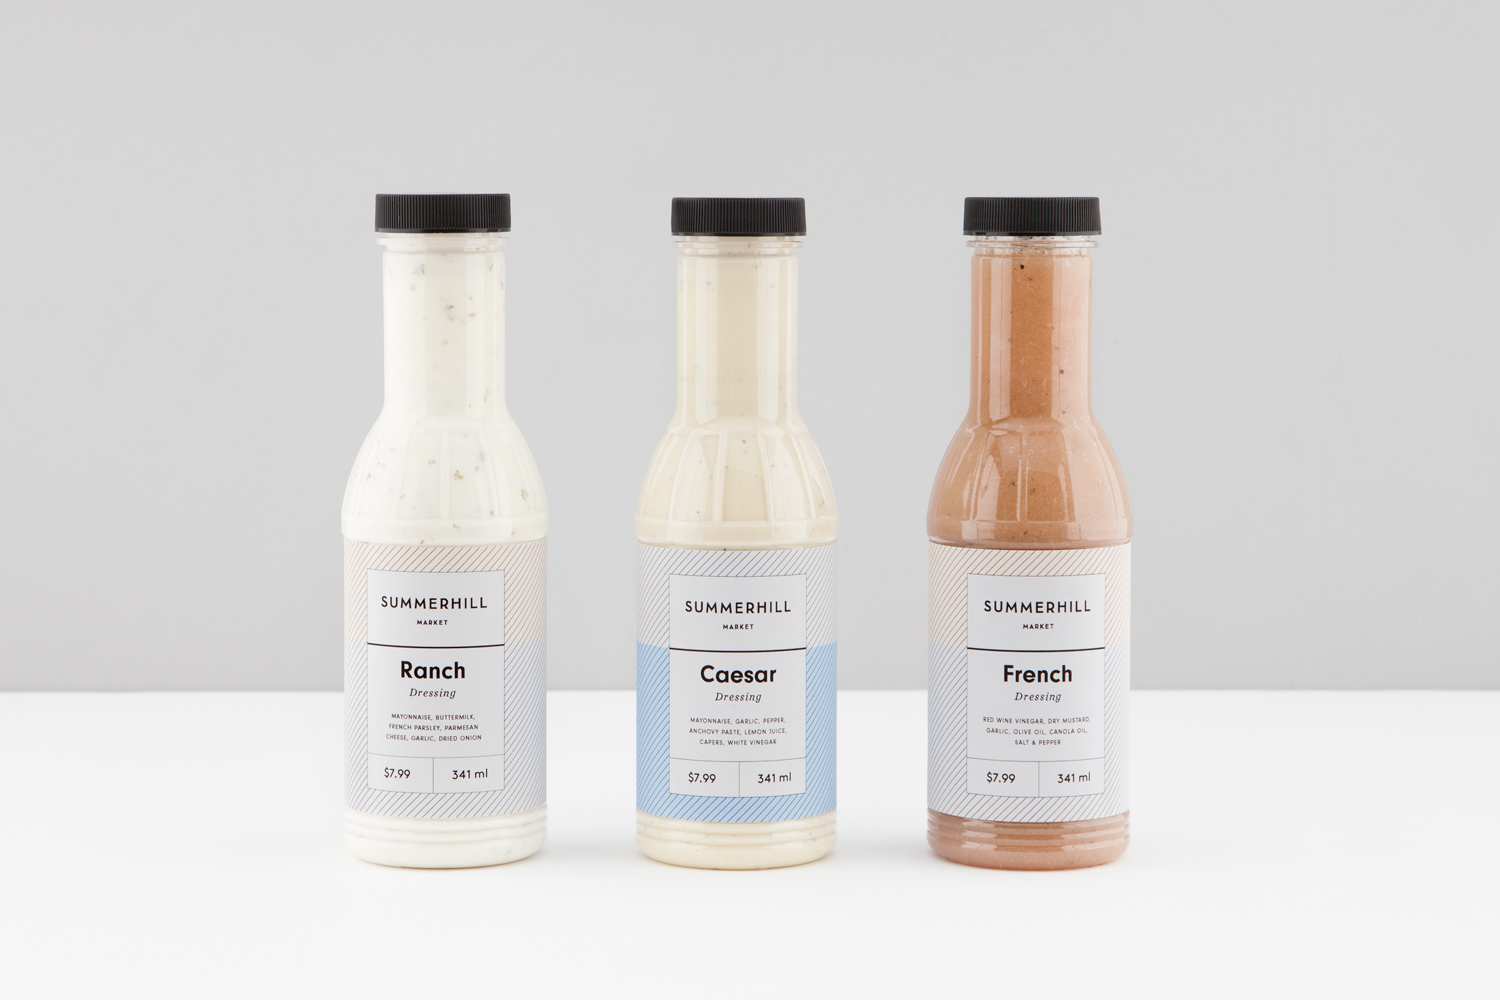 Branding and salad dressing packaging designed by Canadian studio Blok for Toronto based boutique grocery store Summerhill Market